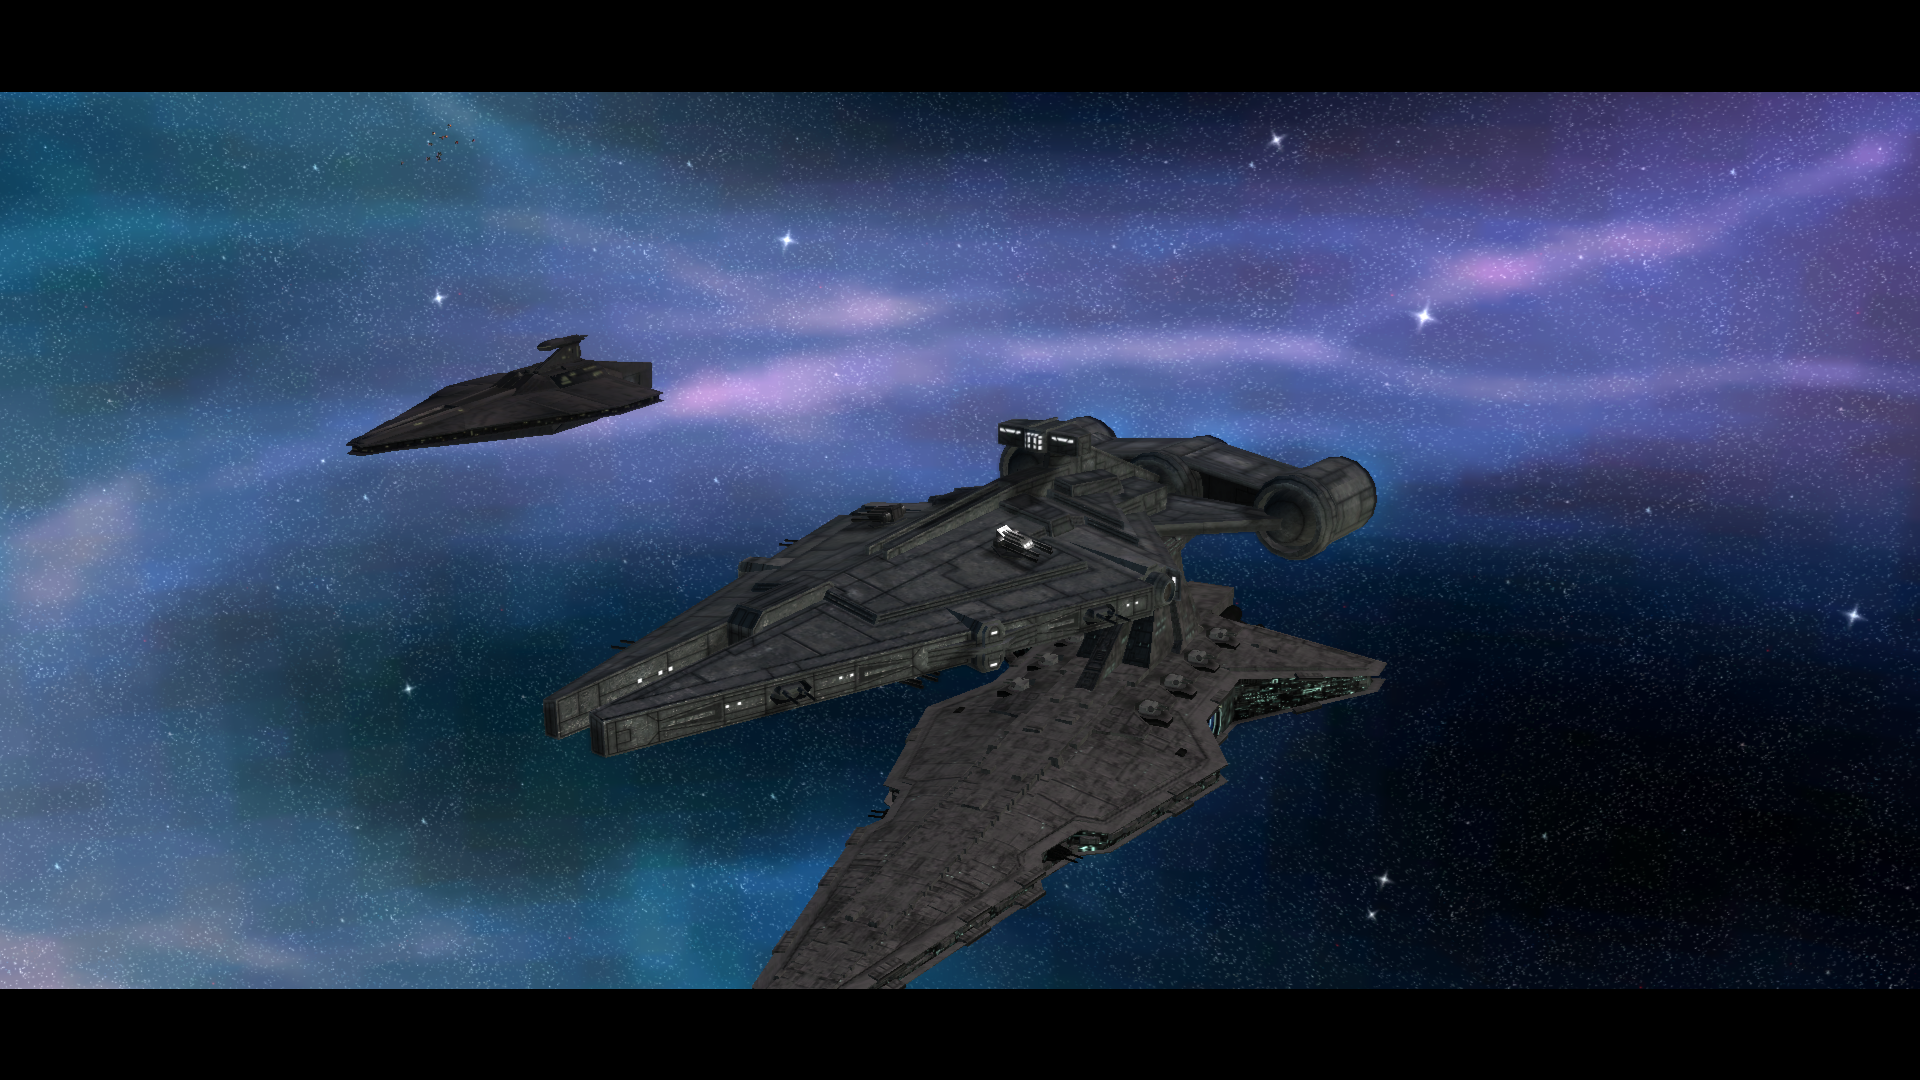 Arquitens Class Imperial Light Cruiser Image Of The Rebellion 2.8 Mod For Star Wars: Empire At War: Forces Of Corruption